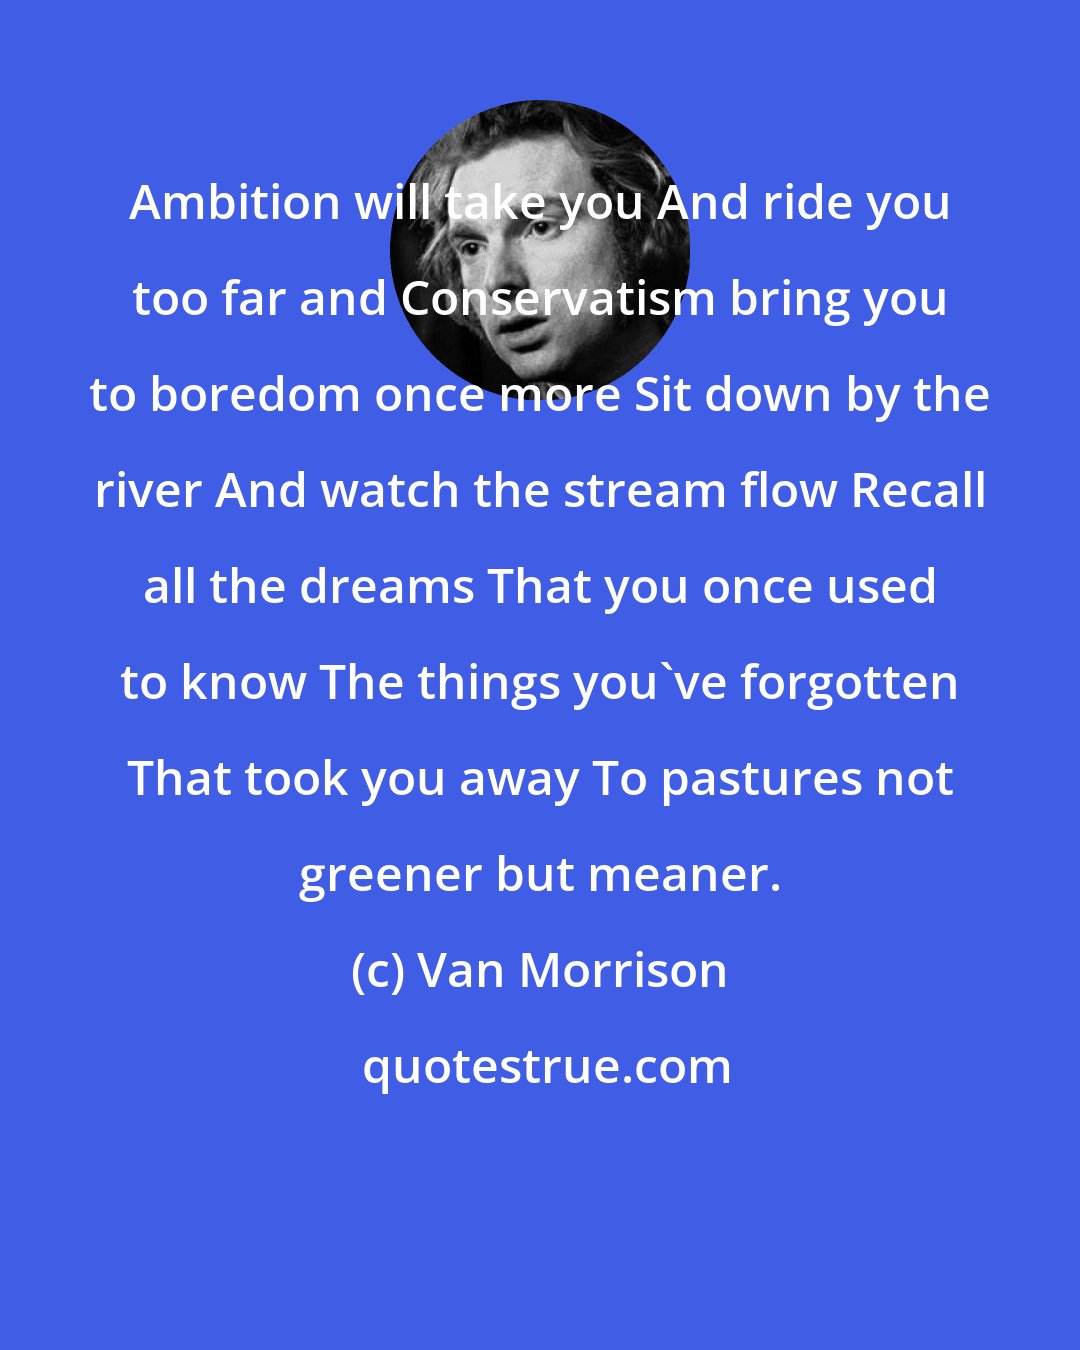 Van Morrison: Ambition will take you And ride you too far and Conservatism bring you to boredom once more Sit down by the river And watch the stream flow Recall all the dreams That you once used to know The things you've forgotten That took you away To pastures not greener but meaner.